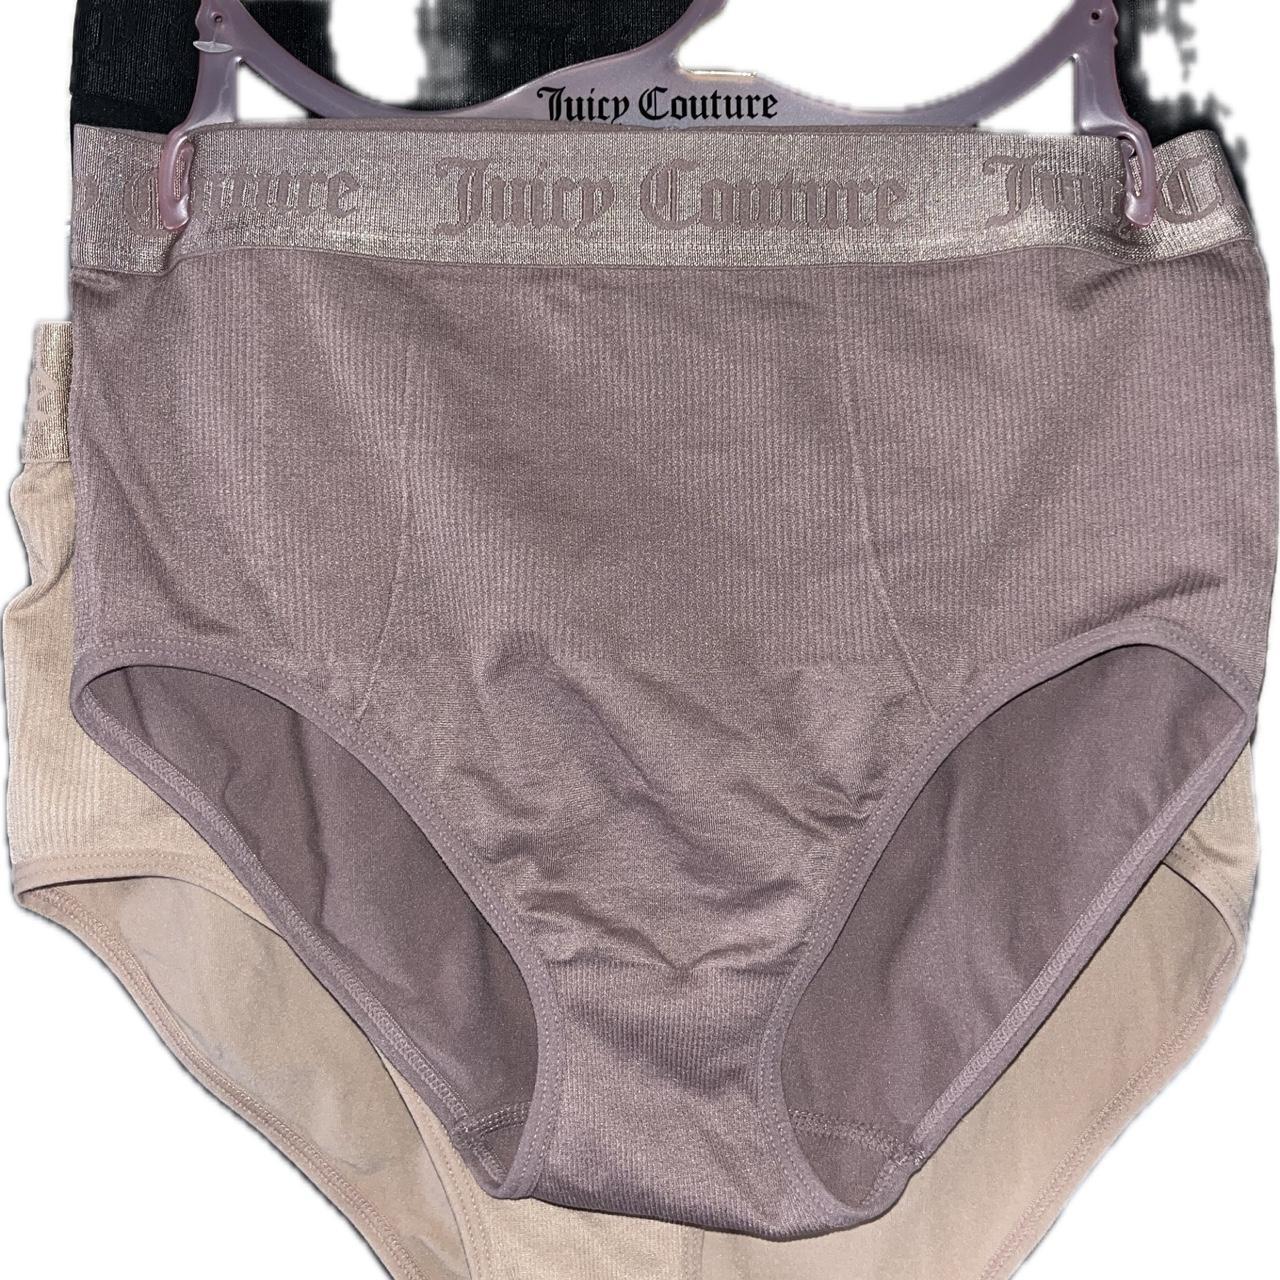 New with tags. Juicy Couture Intimate No Panty Line - Depop